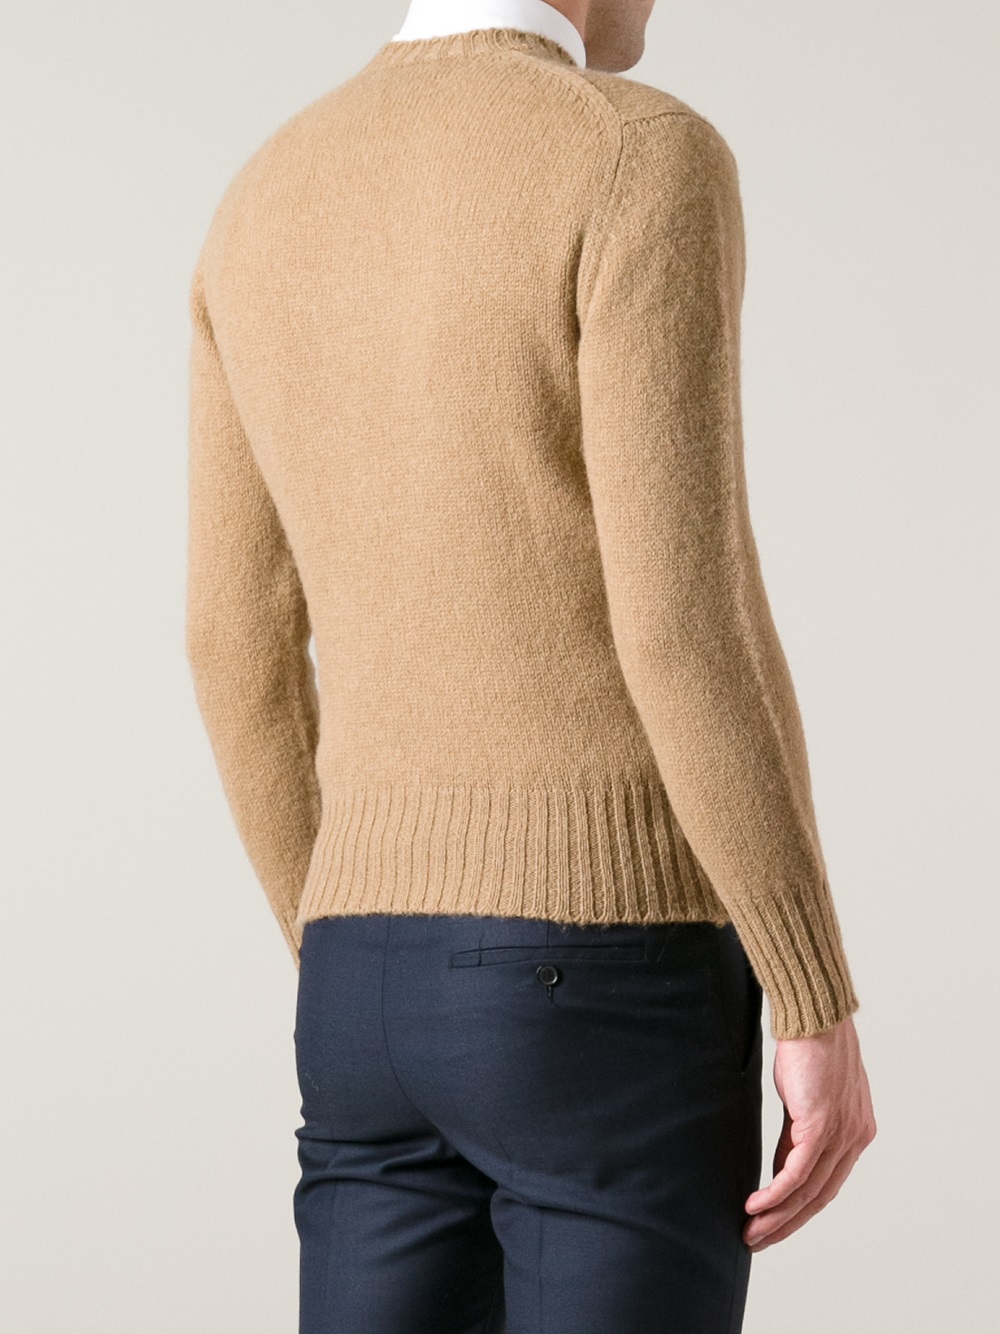 Pringle of scotland Wool Jumper in Natural for Men | Lyst